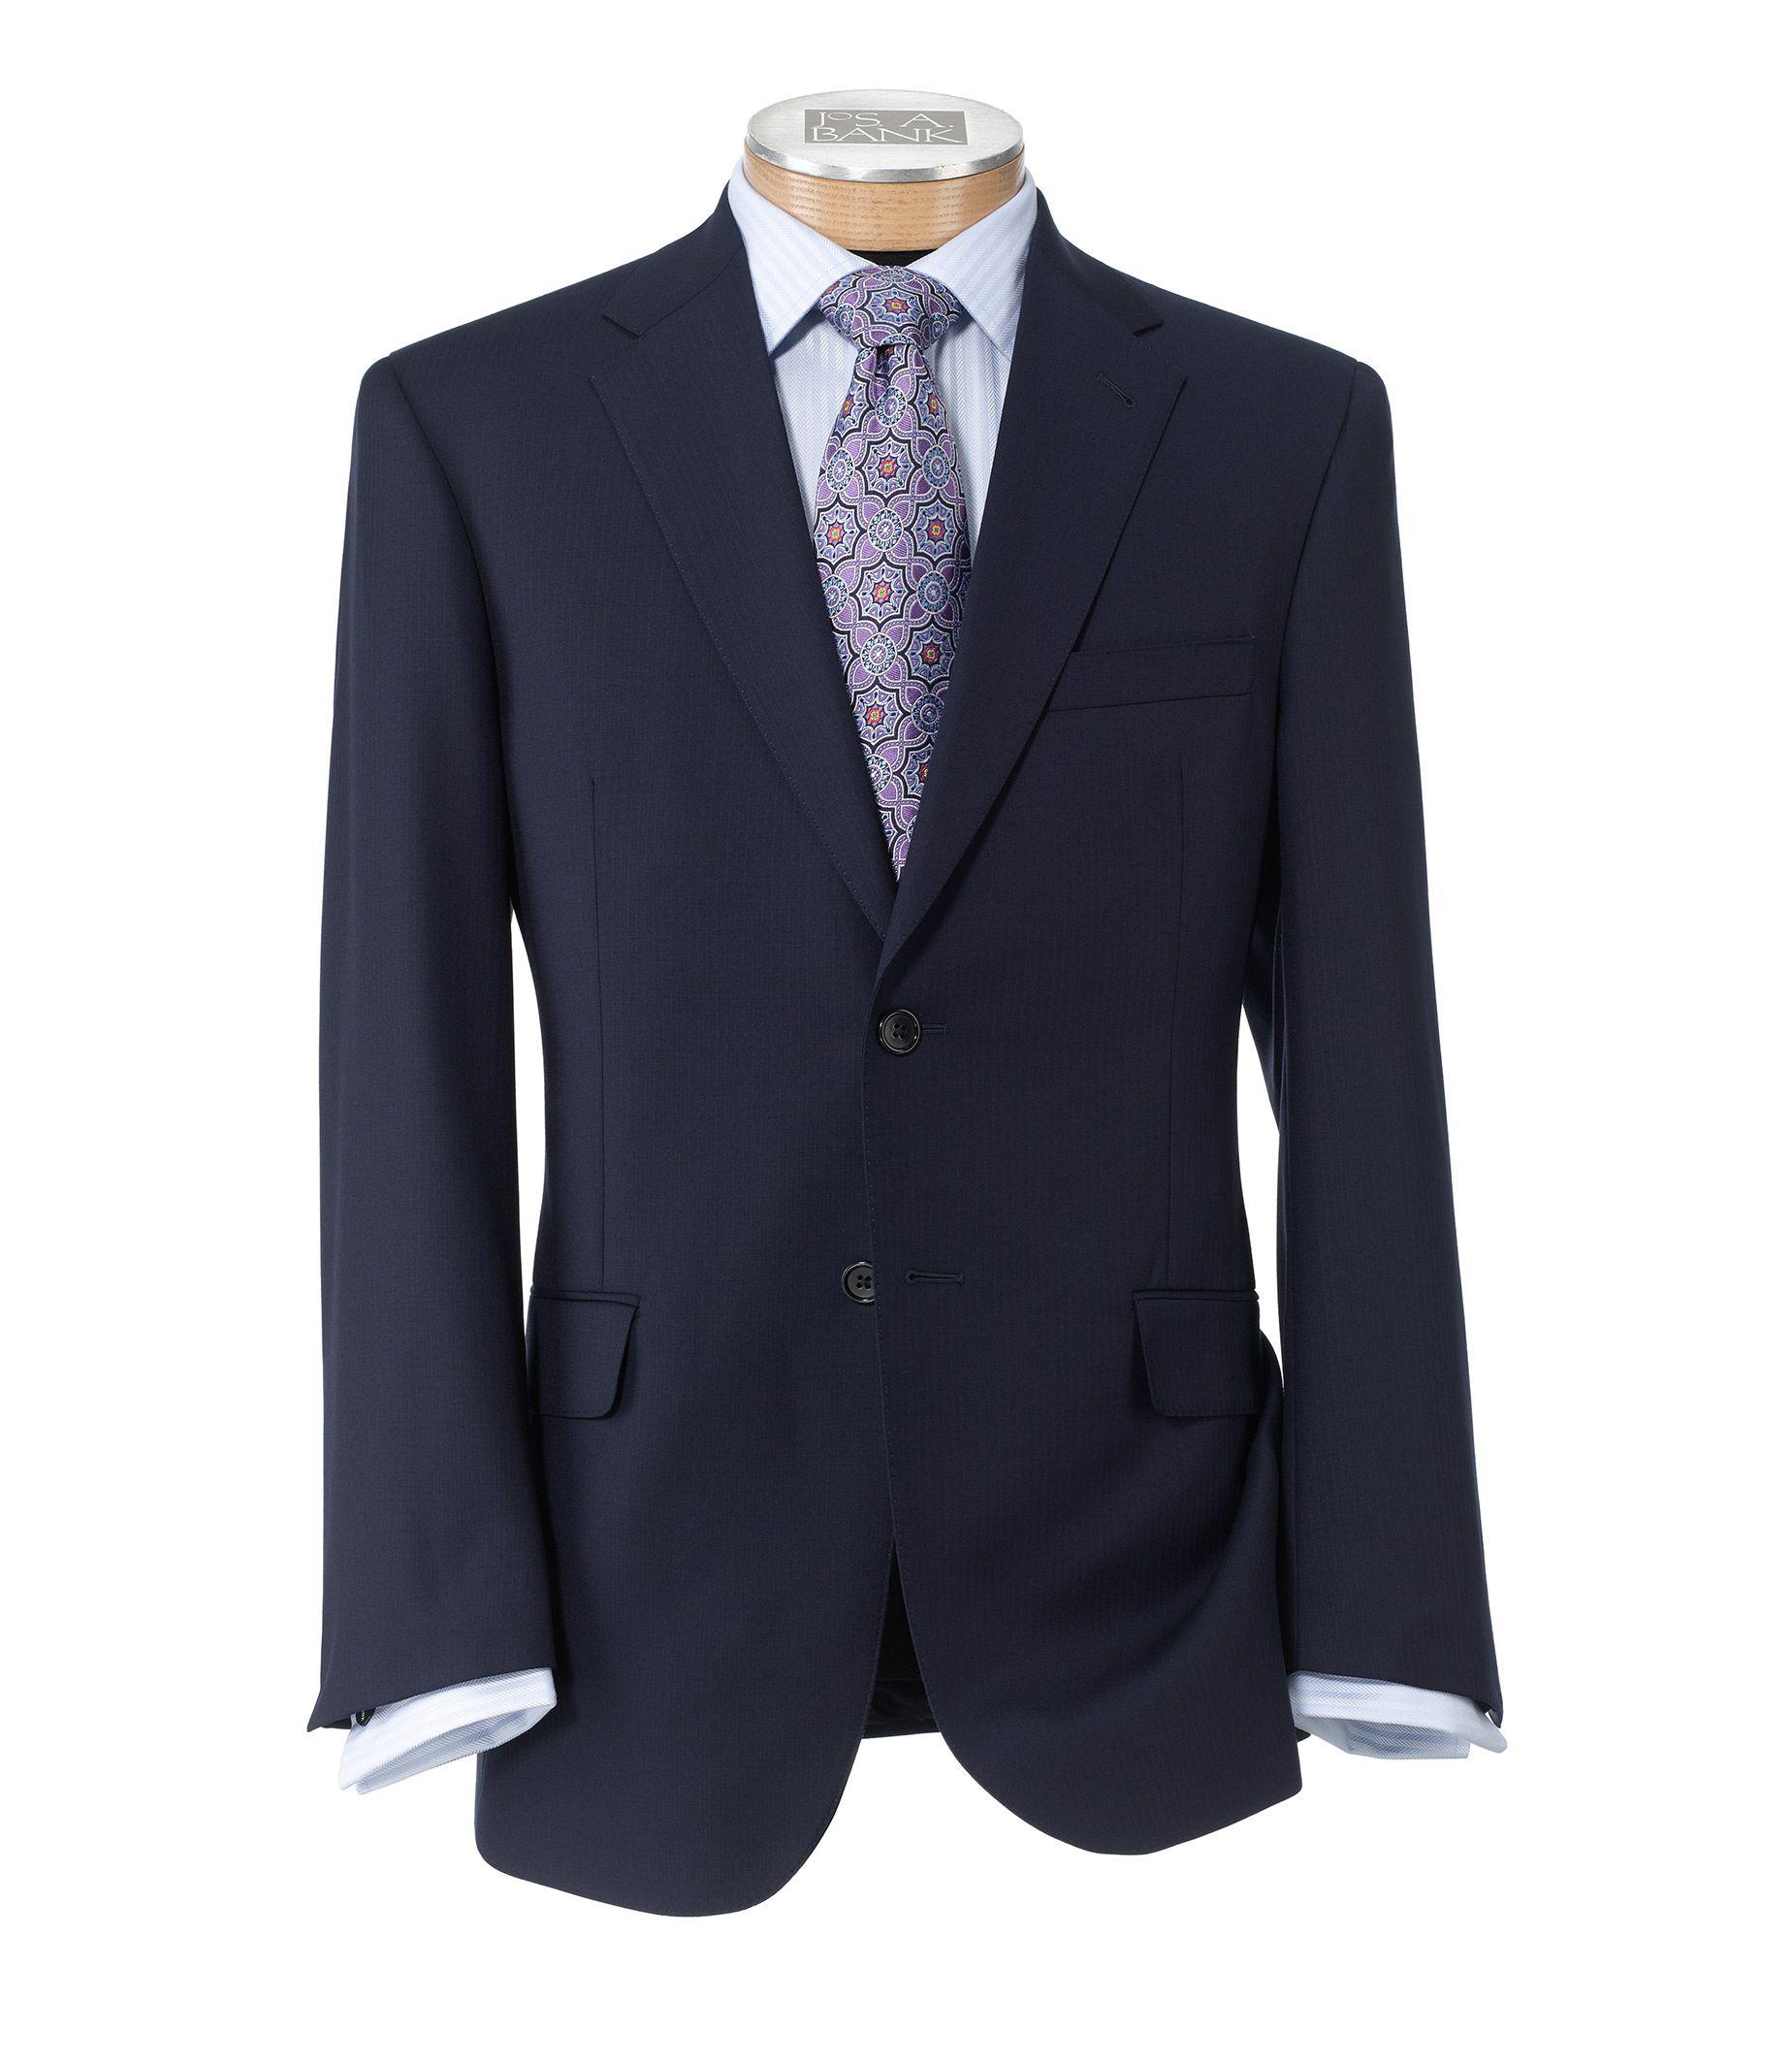 Lyst - Jos. a. bank Signature Gold 2-button Tailored Fit Wool Suit in